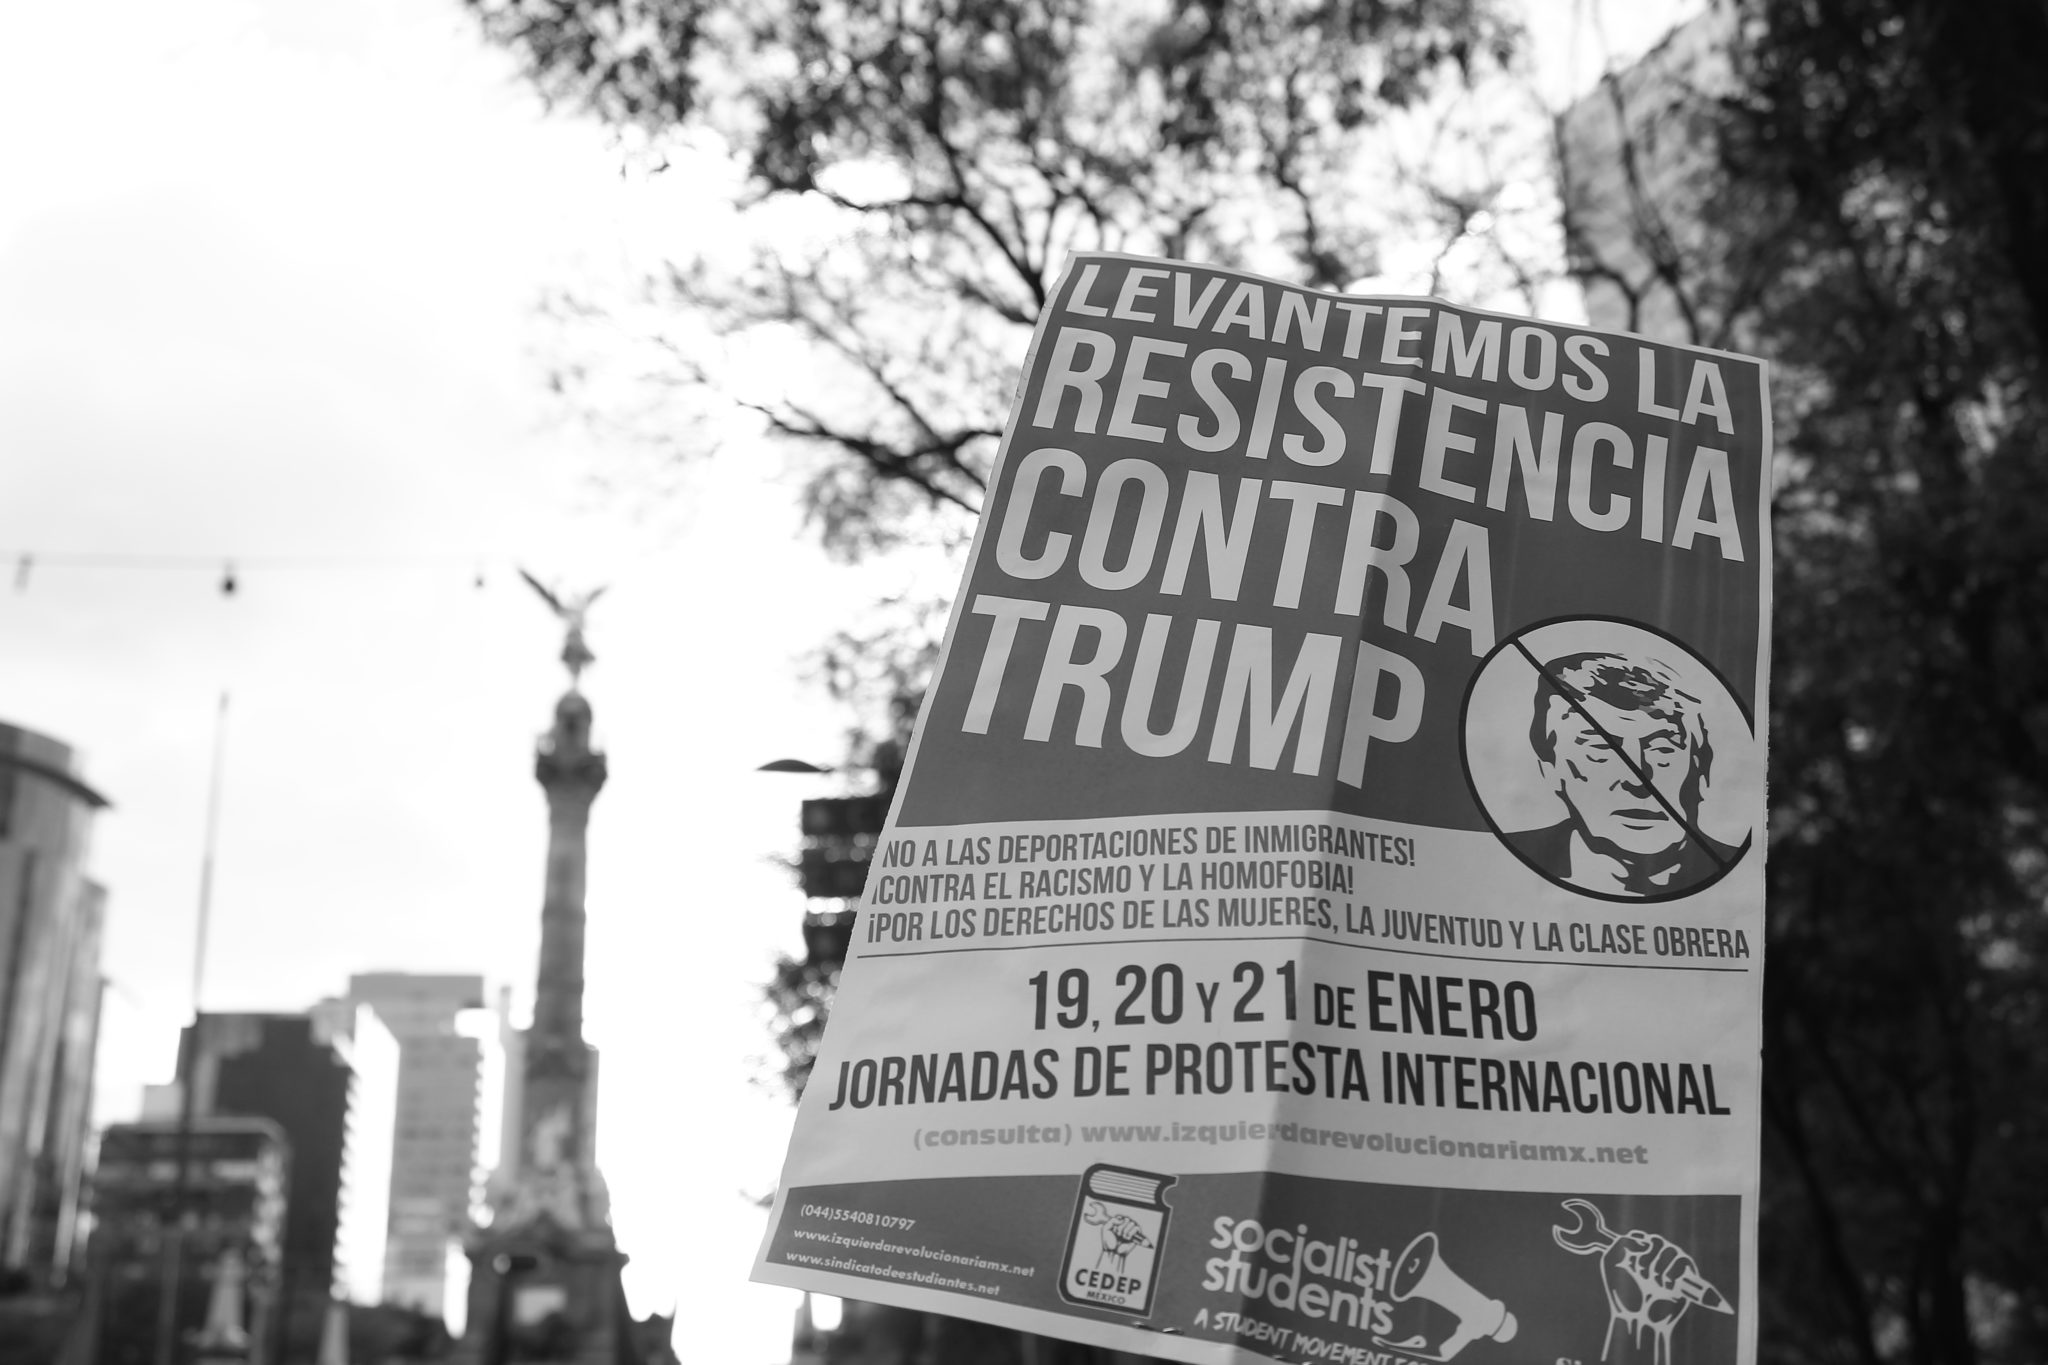 <p>An anti-Trump protest in Mexico City (image: <a href="https://www.flickr.com/photos/127787973@N06/32393209236" target="_blank" rel="noopener">Adrian Martinez </a>)</p>